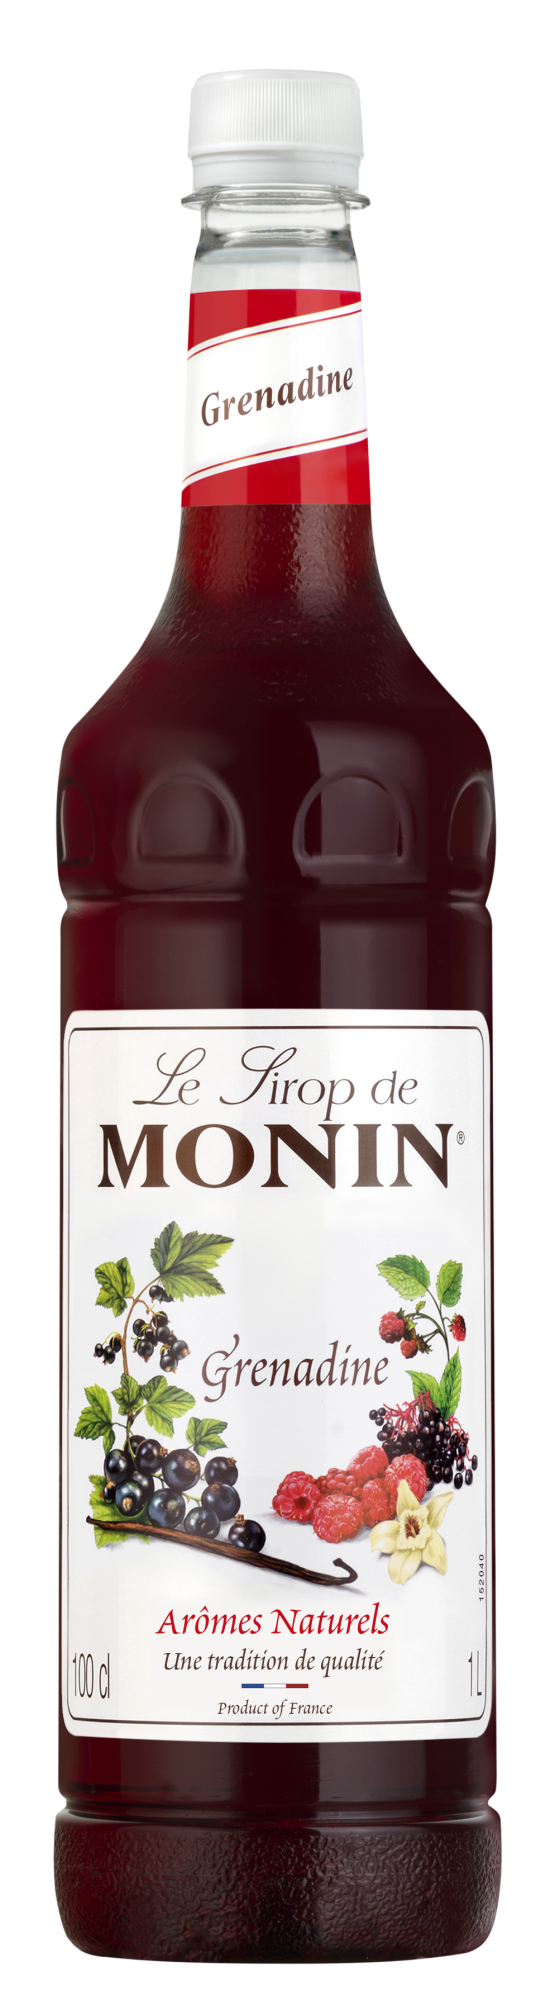 Buy MONIN Grenadine Syrup. It is made from a mixture of mixed berry juice including raspberries and blackcurrants.